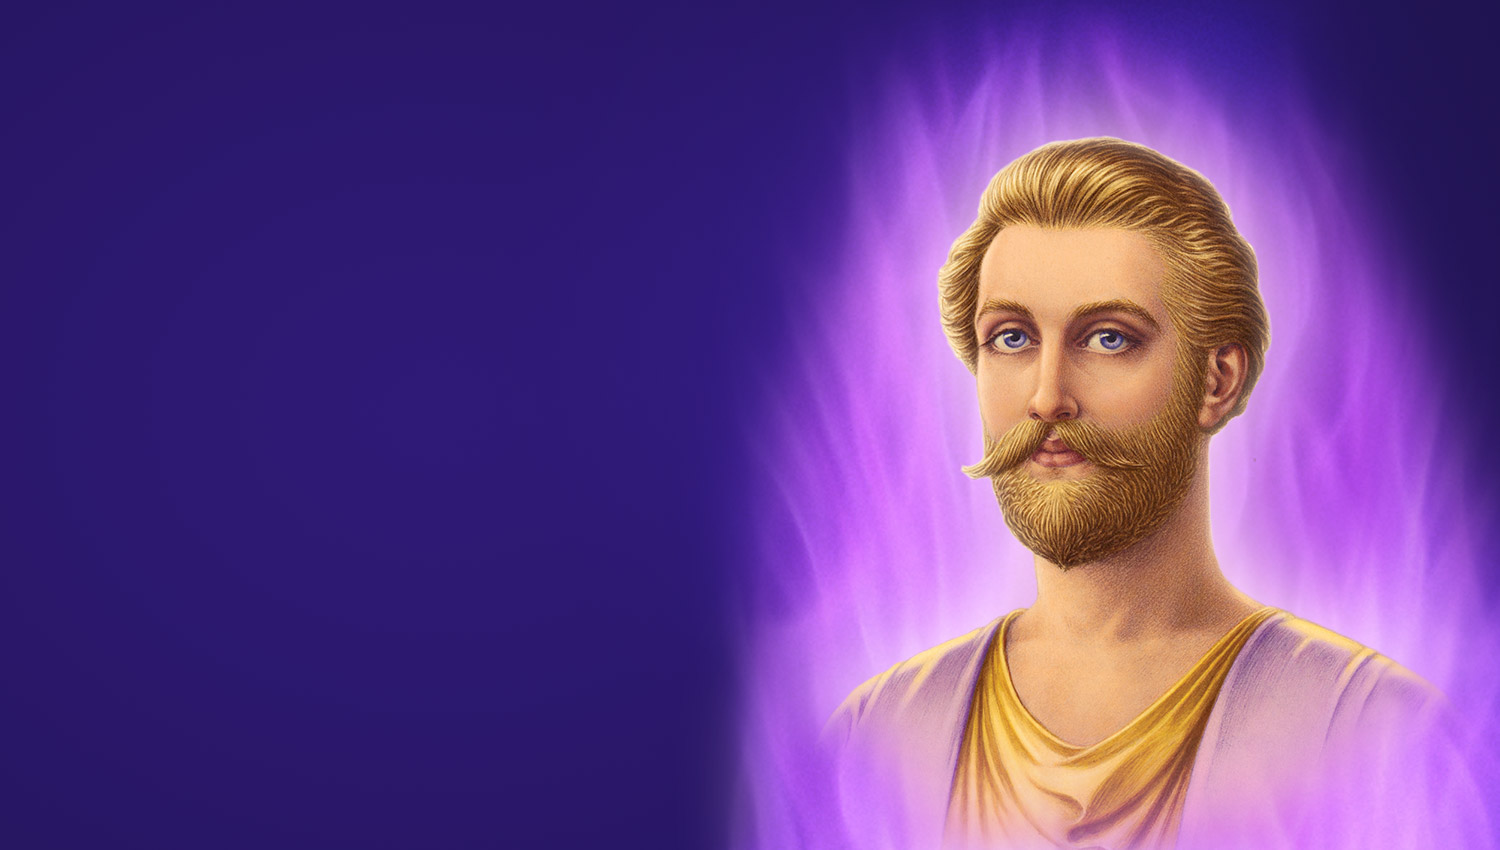 Saint Germain and the Violet Flame